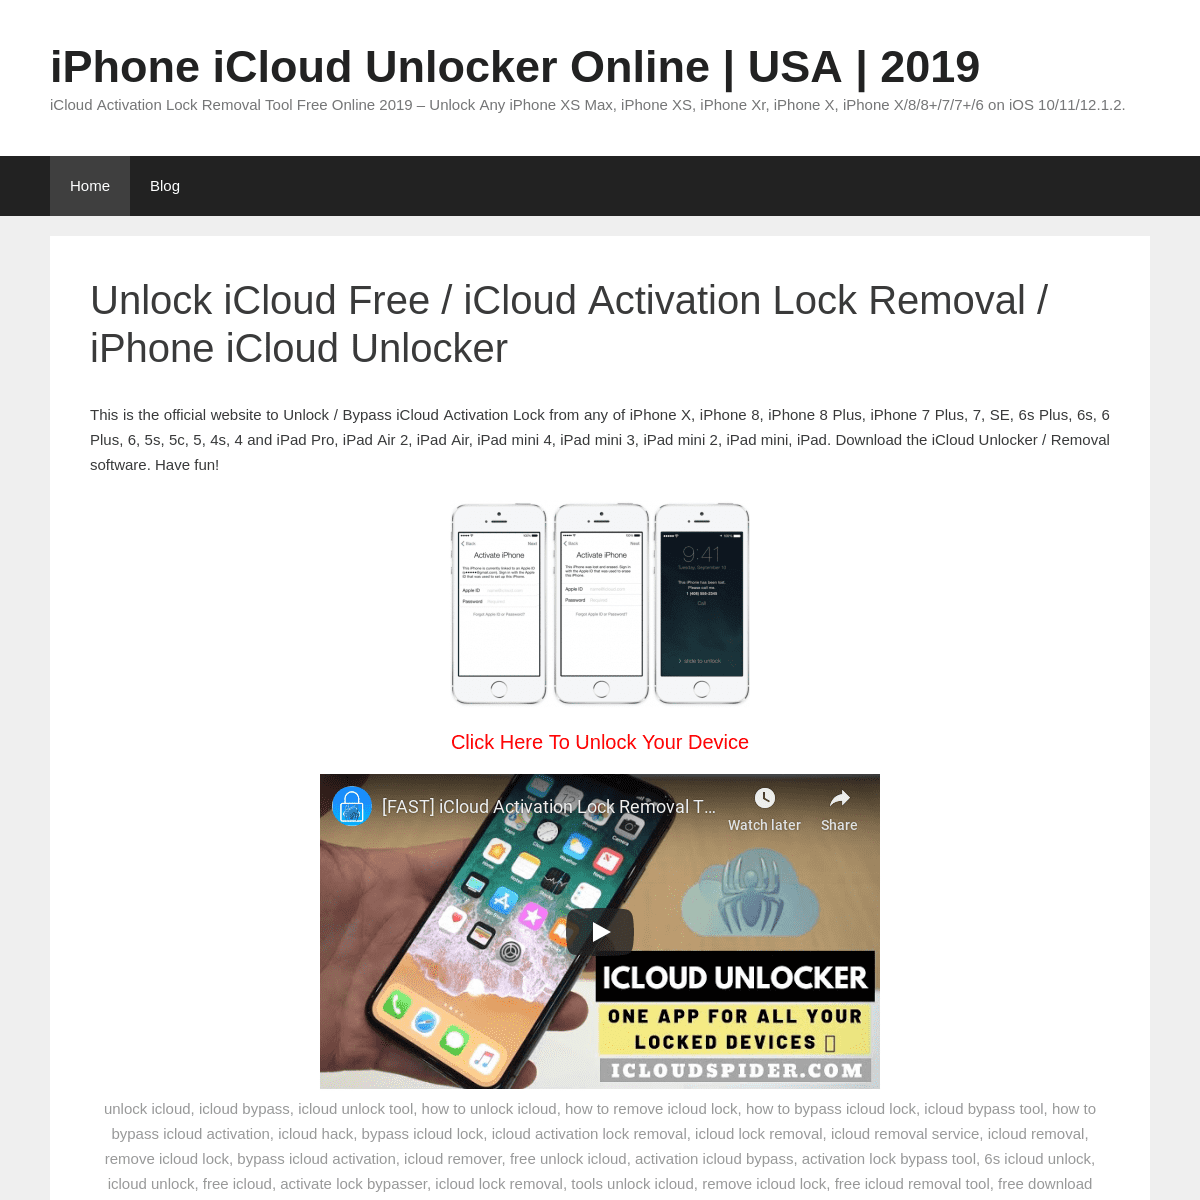 iphone 8 plus icloud activation tool